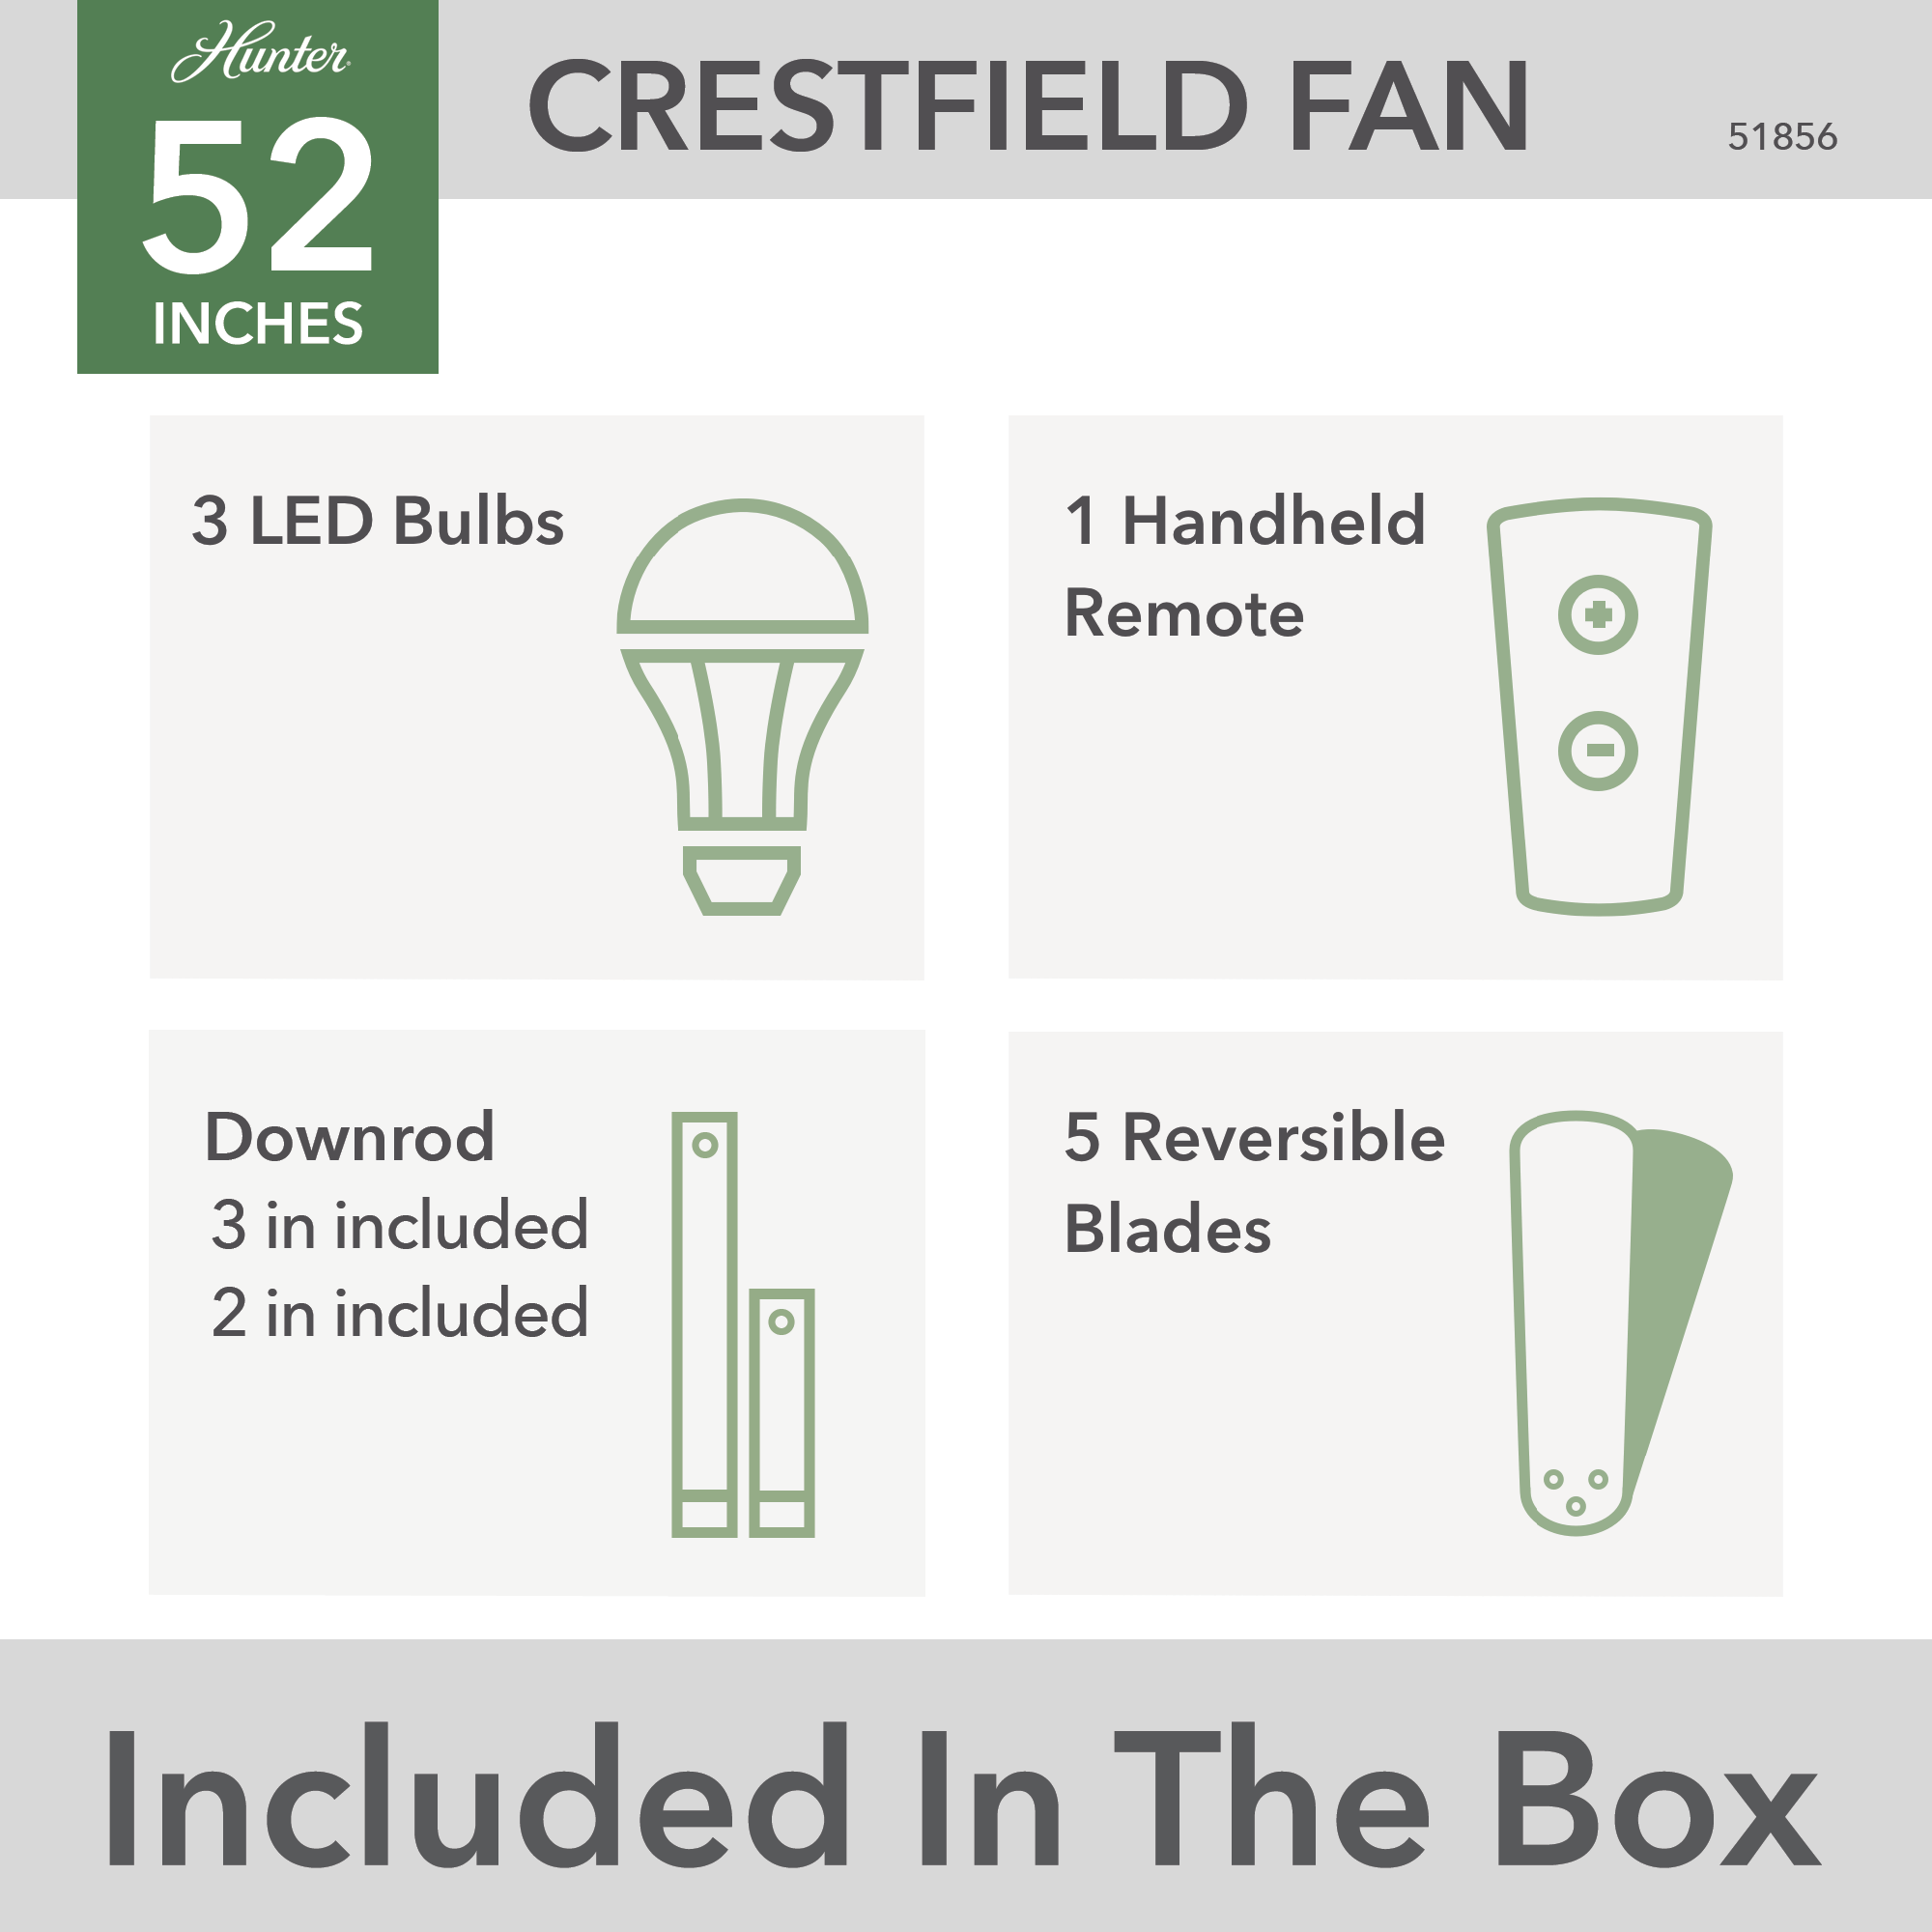 Hunter 52 inch Crestfield Ceiling Fan with LED Light Kit and Handheld Remote